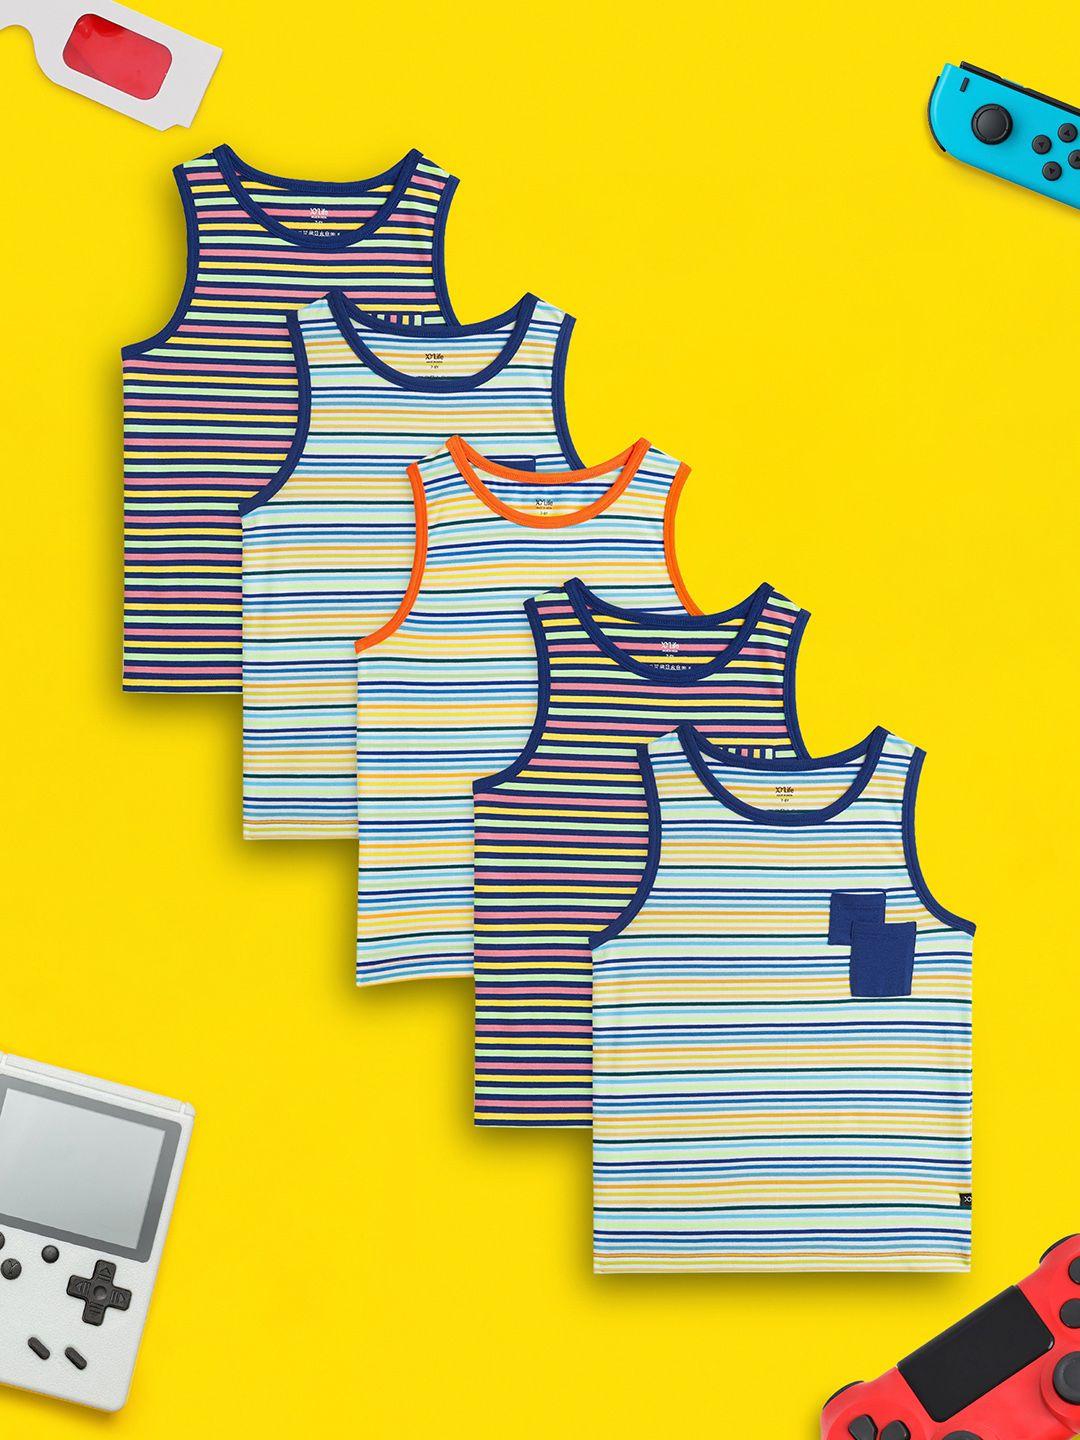 xy-life-boys-pack-of-5-striped-cotton-innerwear-basic-vests